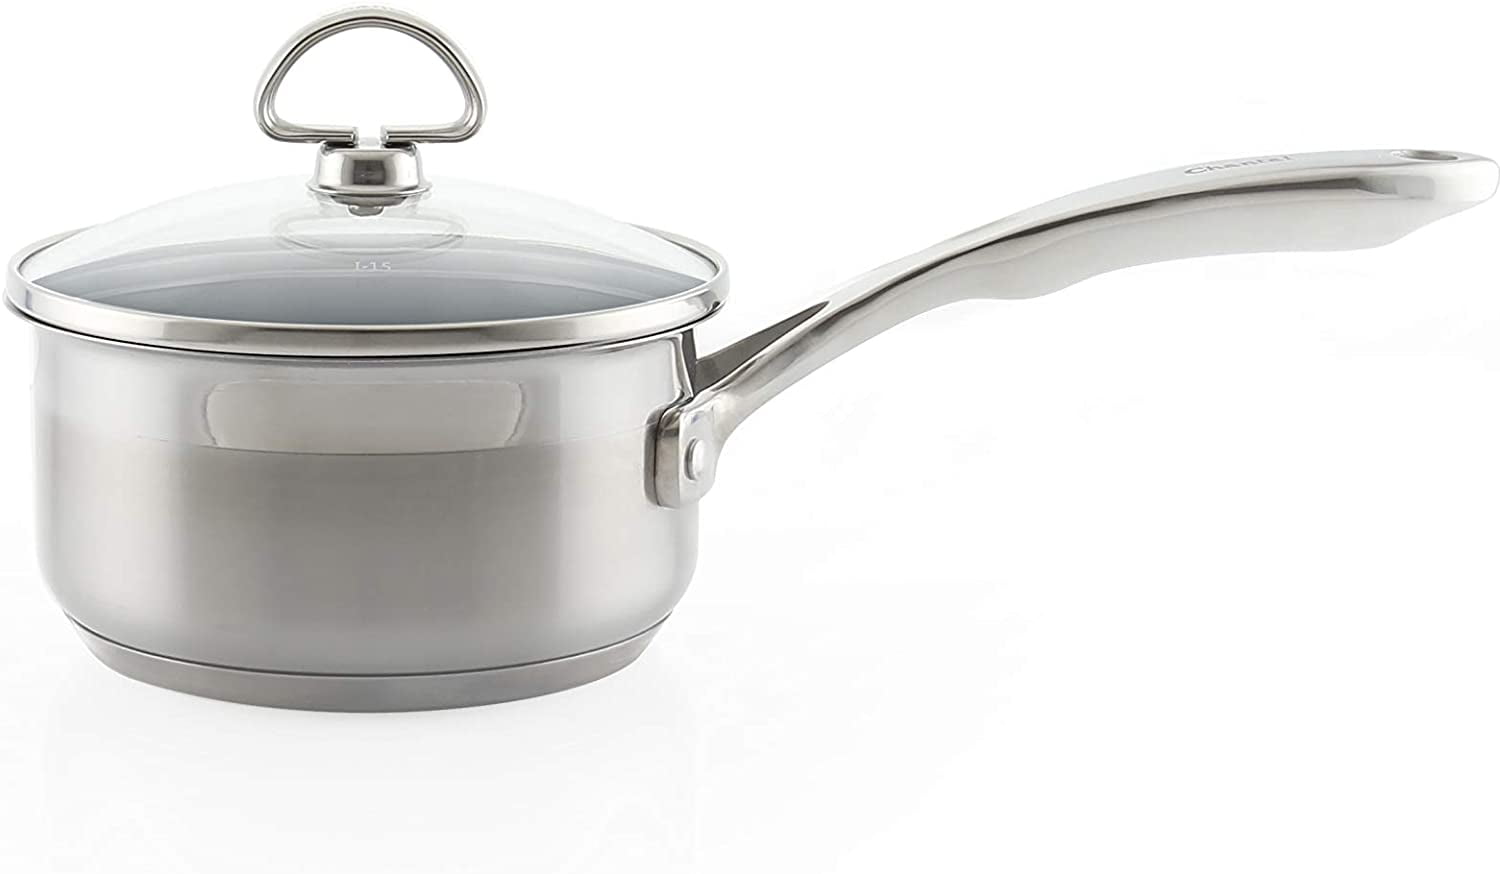 Chantal 3.5 quart Induction 21 Steel Sauce Pan with Lid